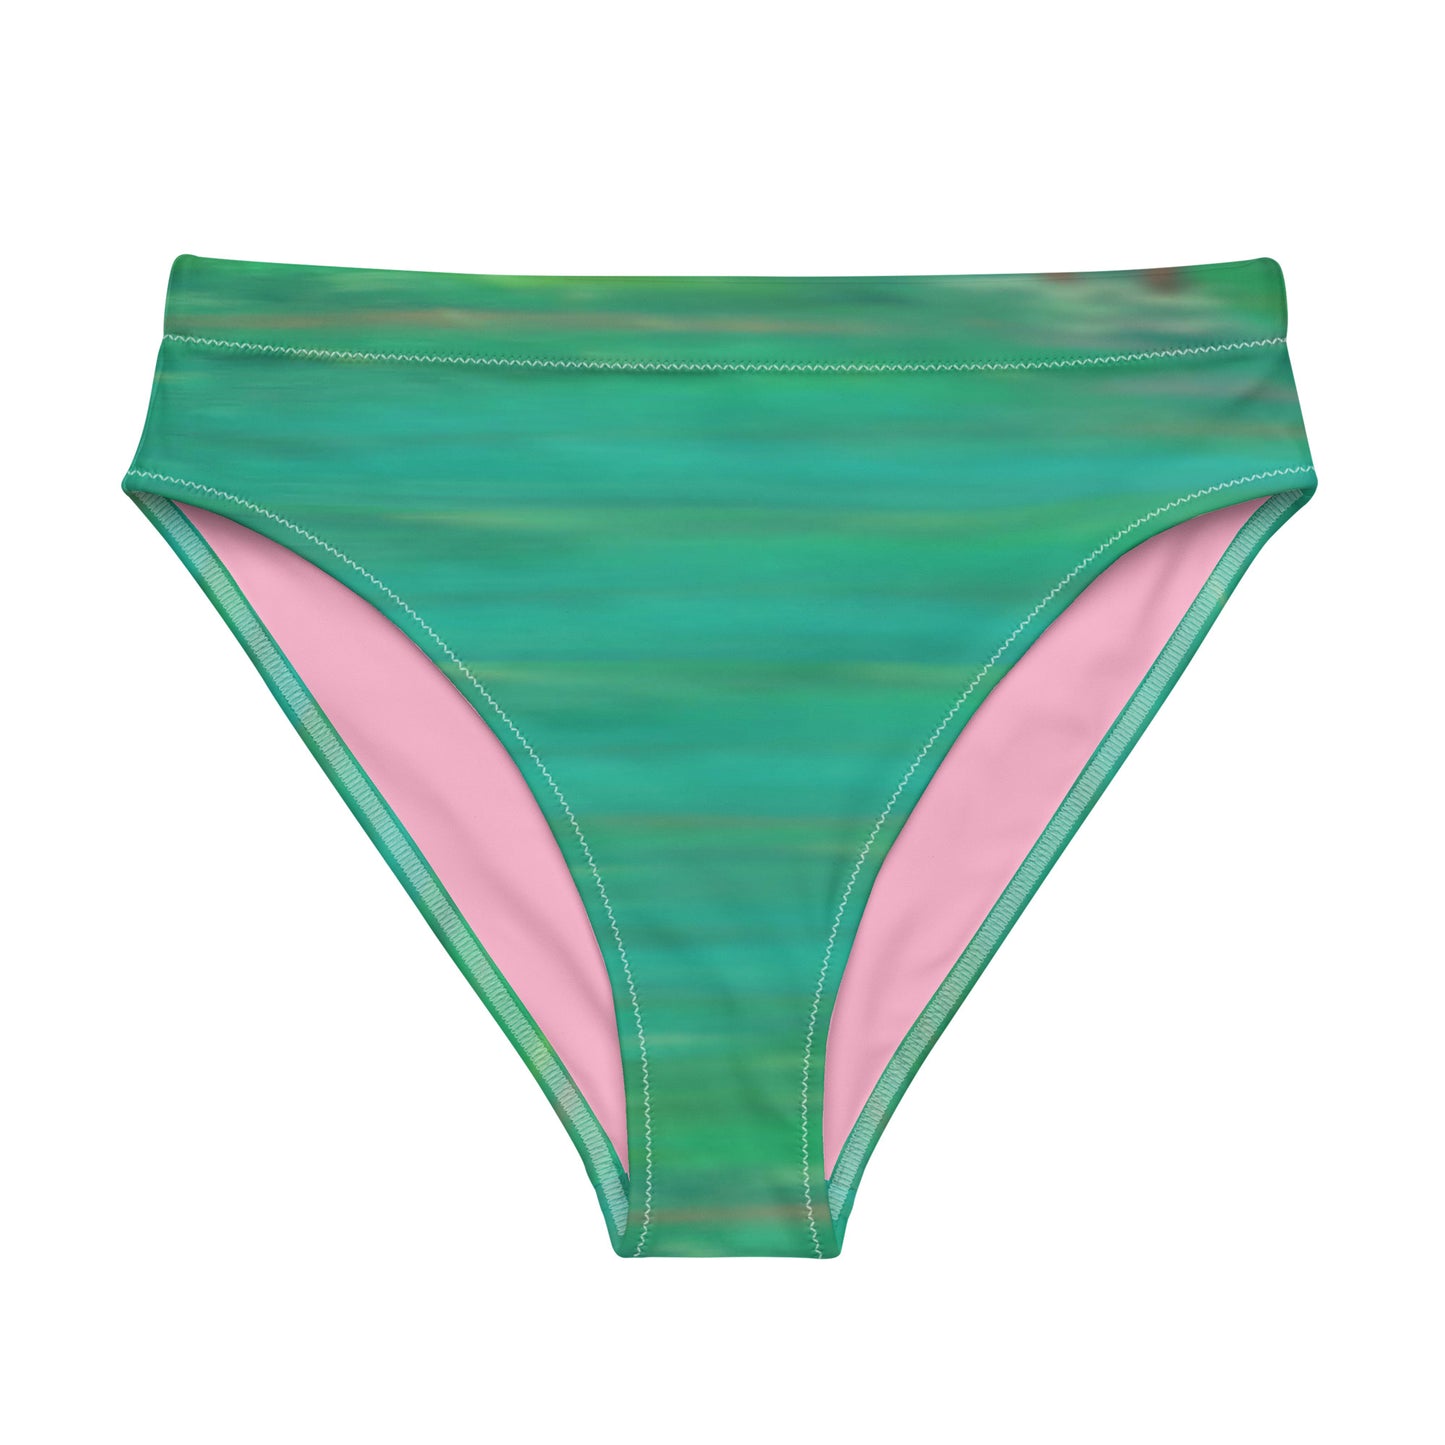 Spoonbill Jungle Green and Pink Recycled high-waisted bikini bottoms